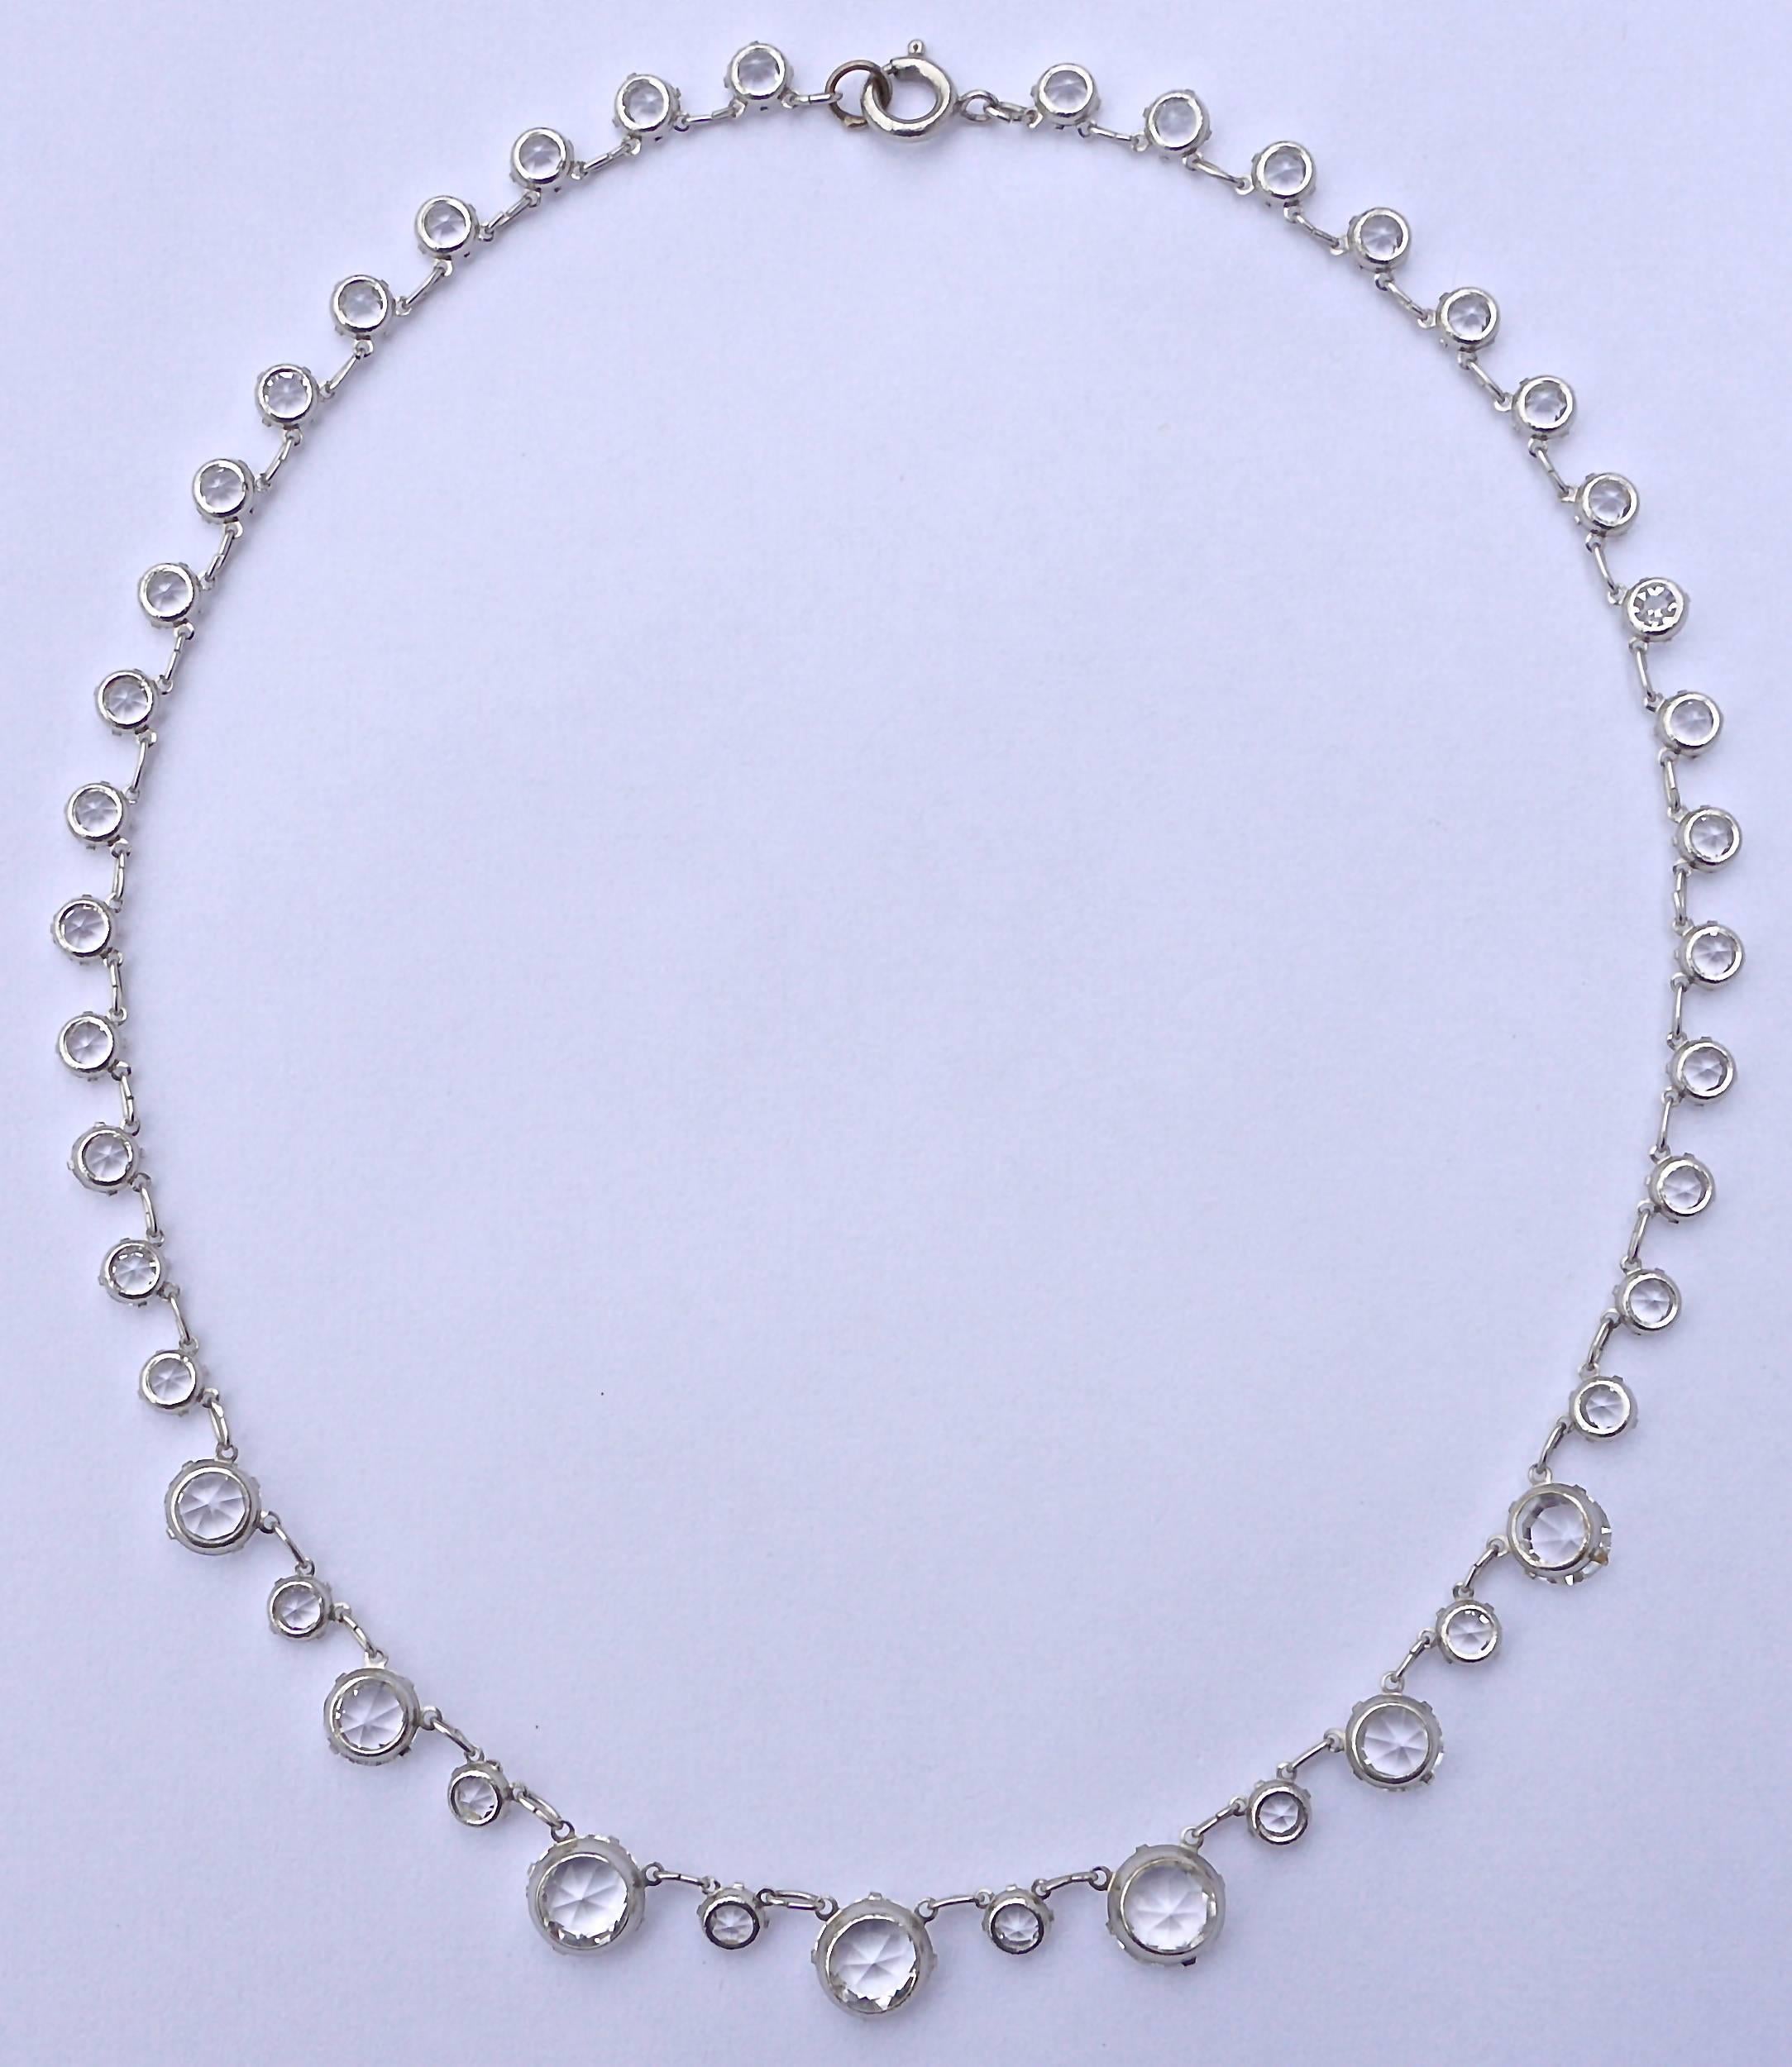 Silver tone Art Deco necklace with beautiful clear crystals in open back settings, and a spring bolt clasp. The faceted crystals are dome shaped at the front and pointed at the back, for maximum sparkle. Length 39cm / 15.3 inches. The smallest